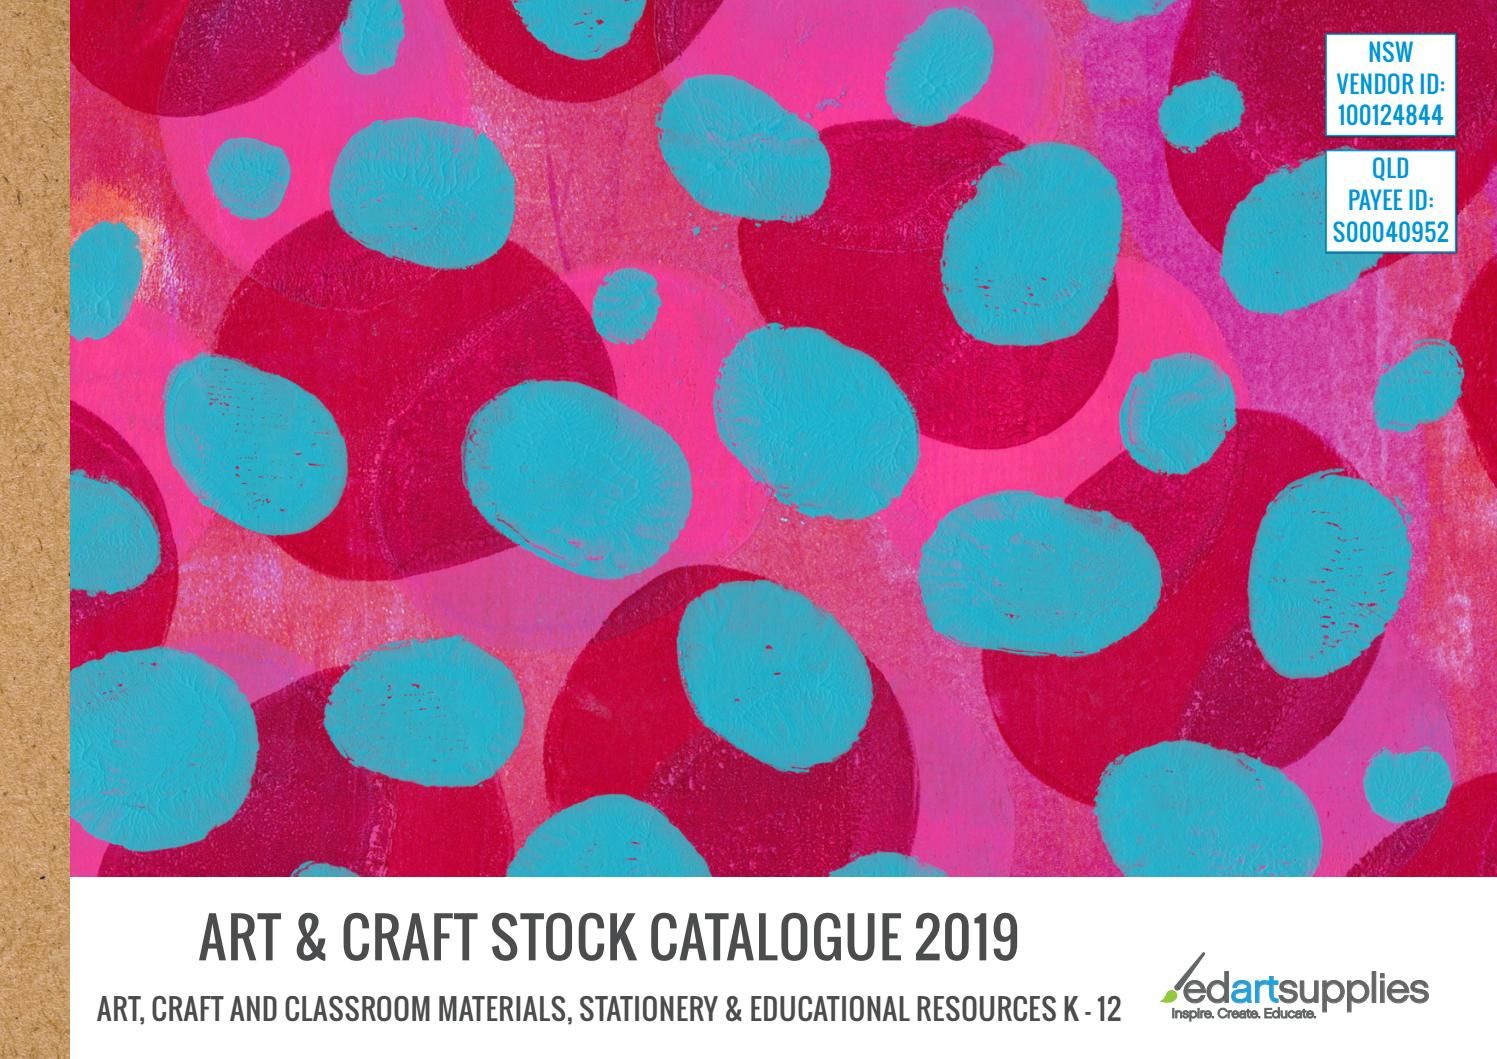 Ed Art Supplies Art & Craft Stock Catalogue 2019 Within Recent Blended Fabric Mod Dinosaur 3 Piece Wall Hangings Set (Gallery 20 of 20)